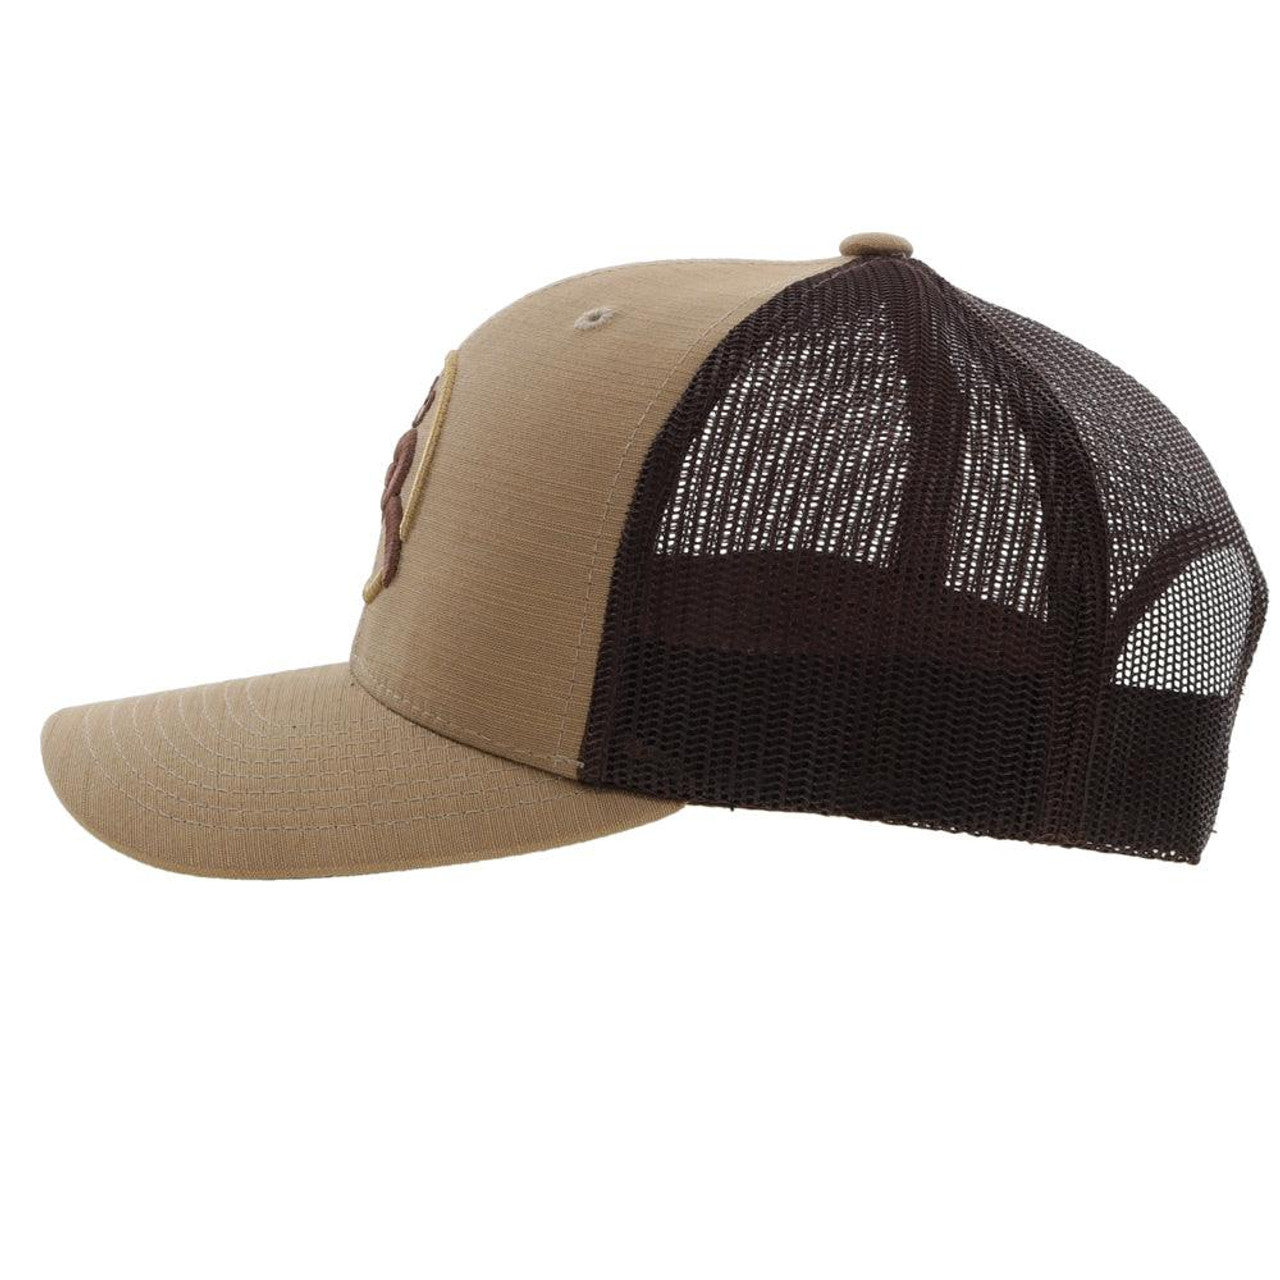 Hooey "Strap" Roughy 6-Panel Youth Trucker Hat